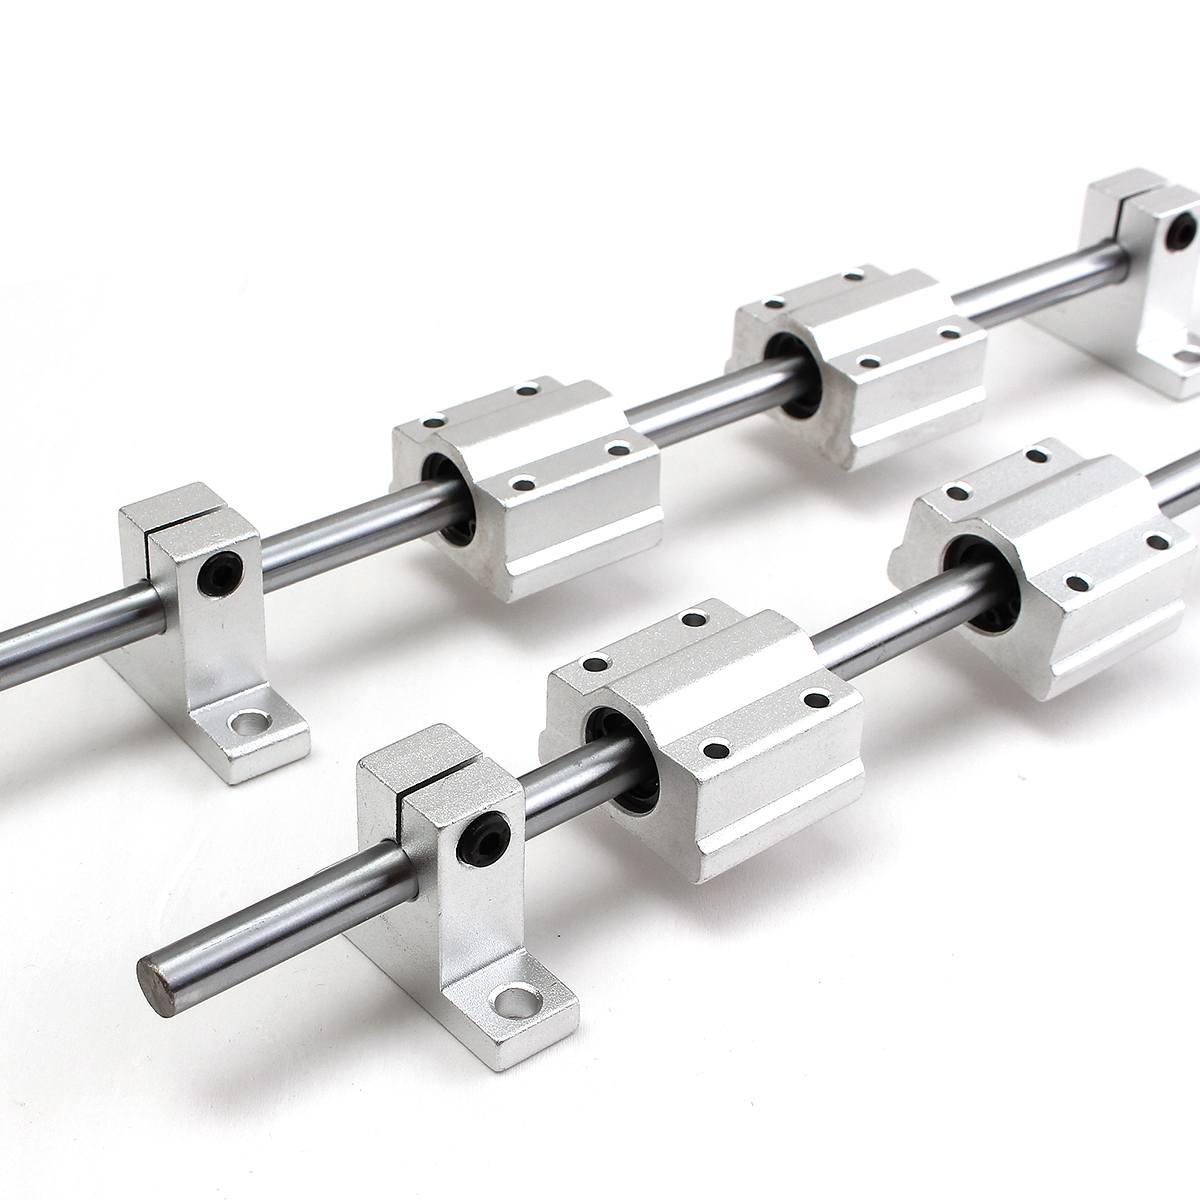 2 Set 300mm Linear Guide Rail Slide Shaft Rod With 4Pcs SCS8UU 8mm Bearing Support Block Slider For CNC Router Part